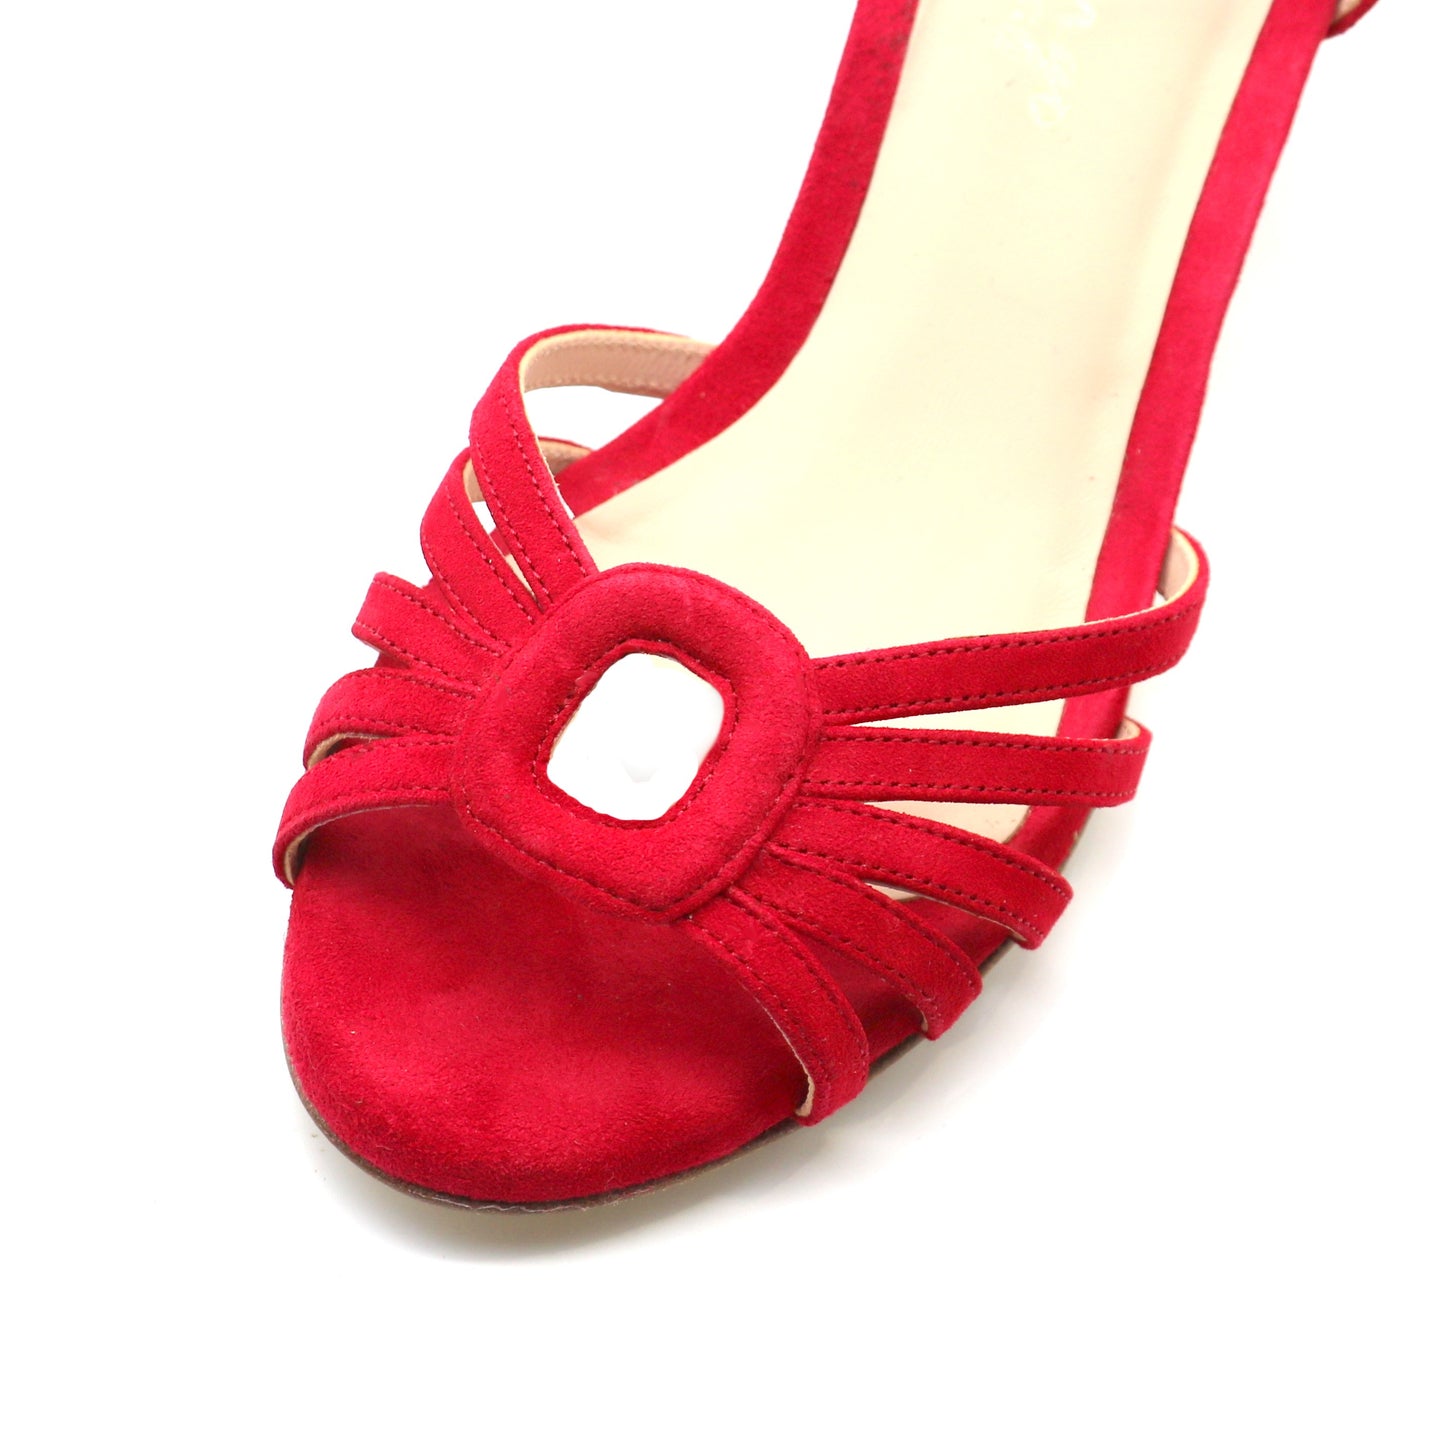 Buenos Aires cuir velours rouge profond